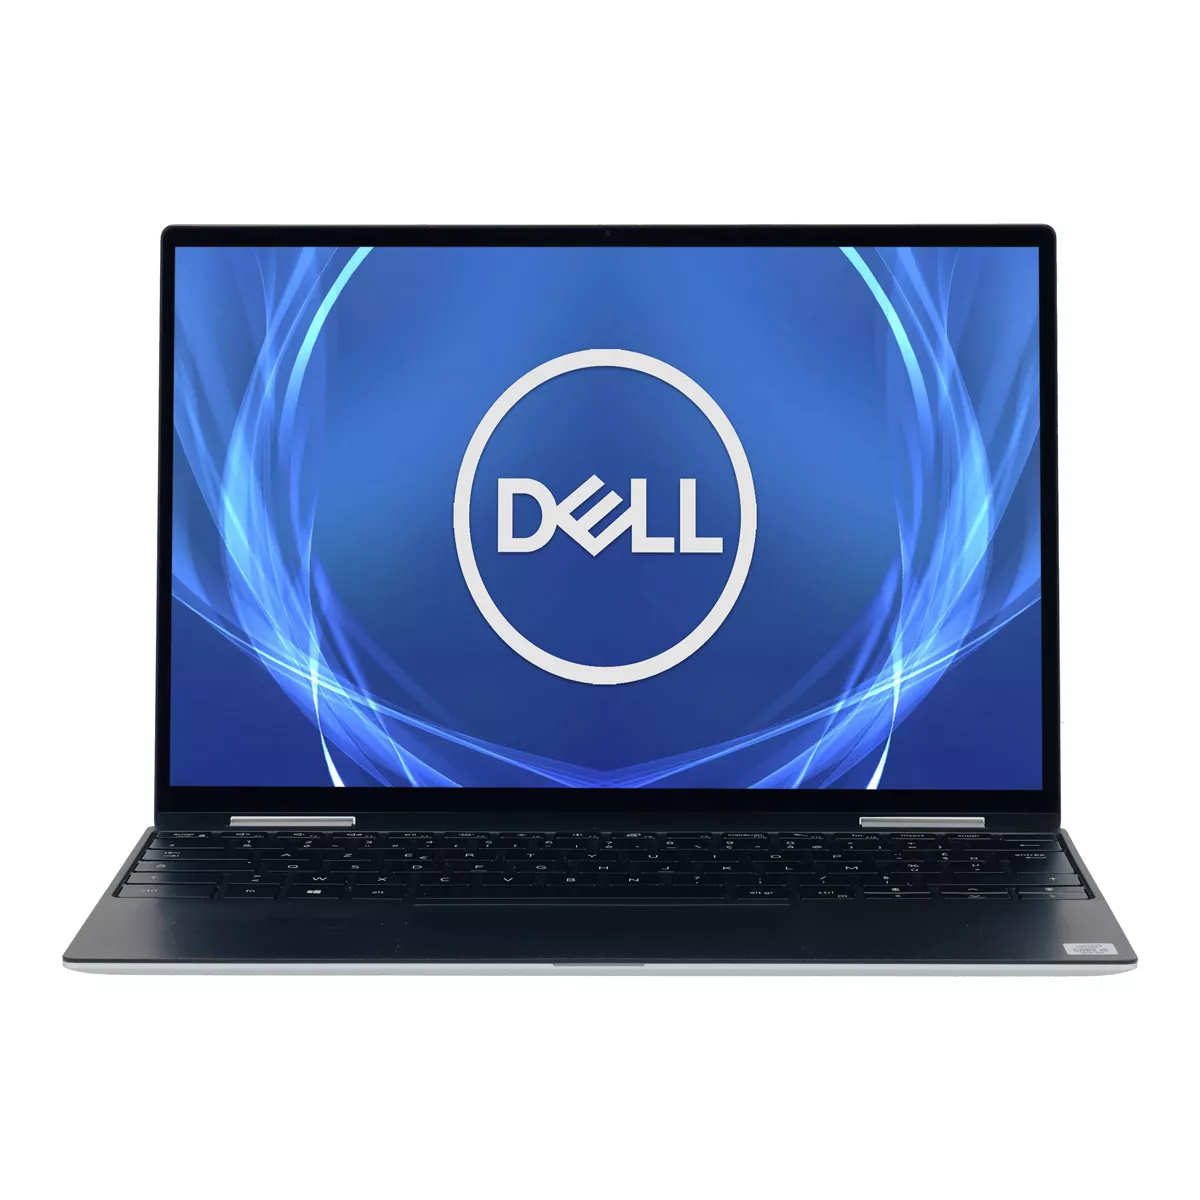 Dell XPS 13 - 7390 2-in1 Core i5 1035G1 240 GB M.2 nVME SSD Webcam A+